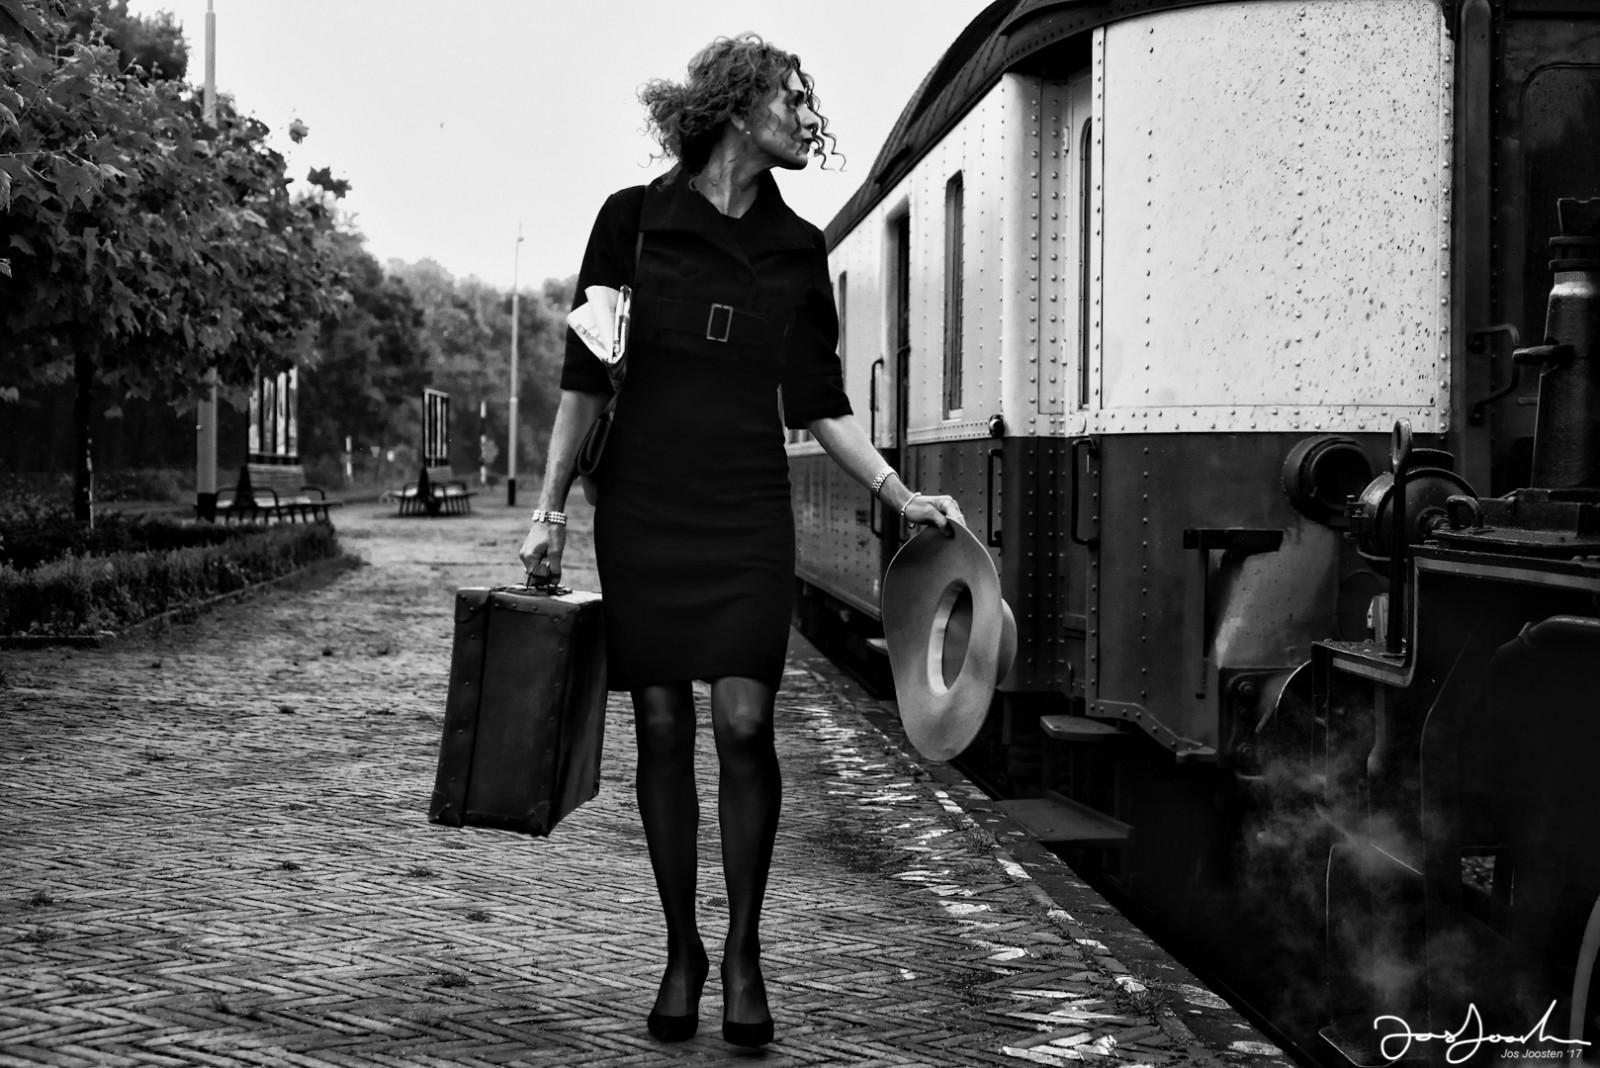 learn-about-composition-in-photography-lady-with-train-by-jos-joosten